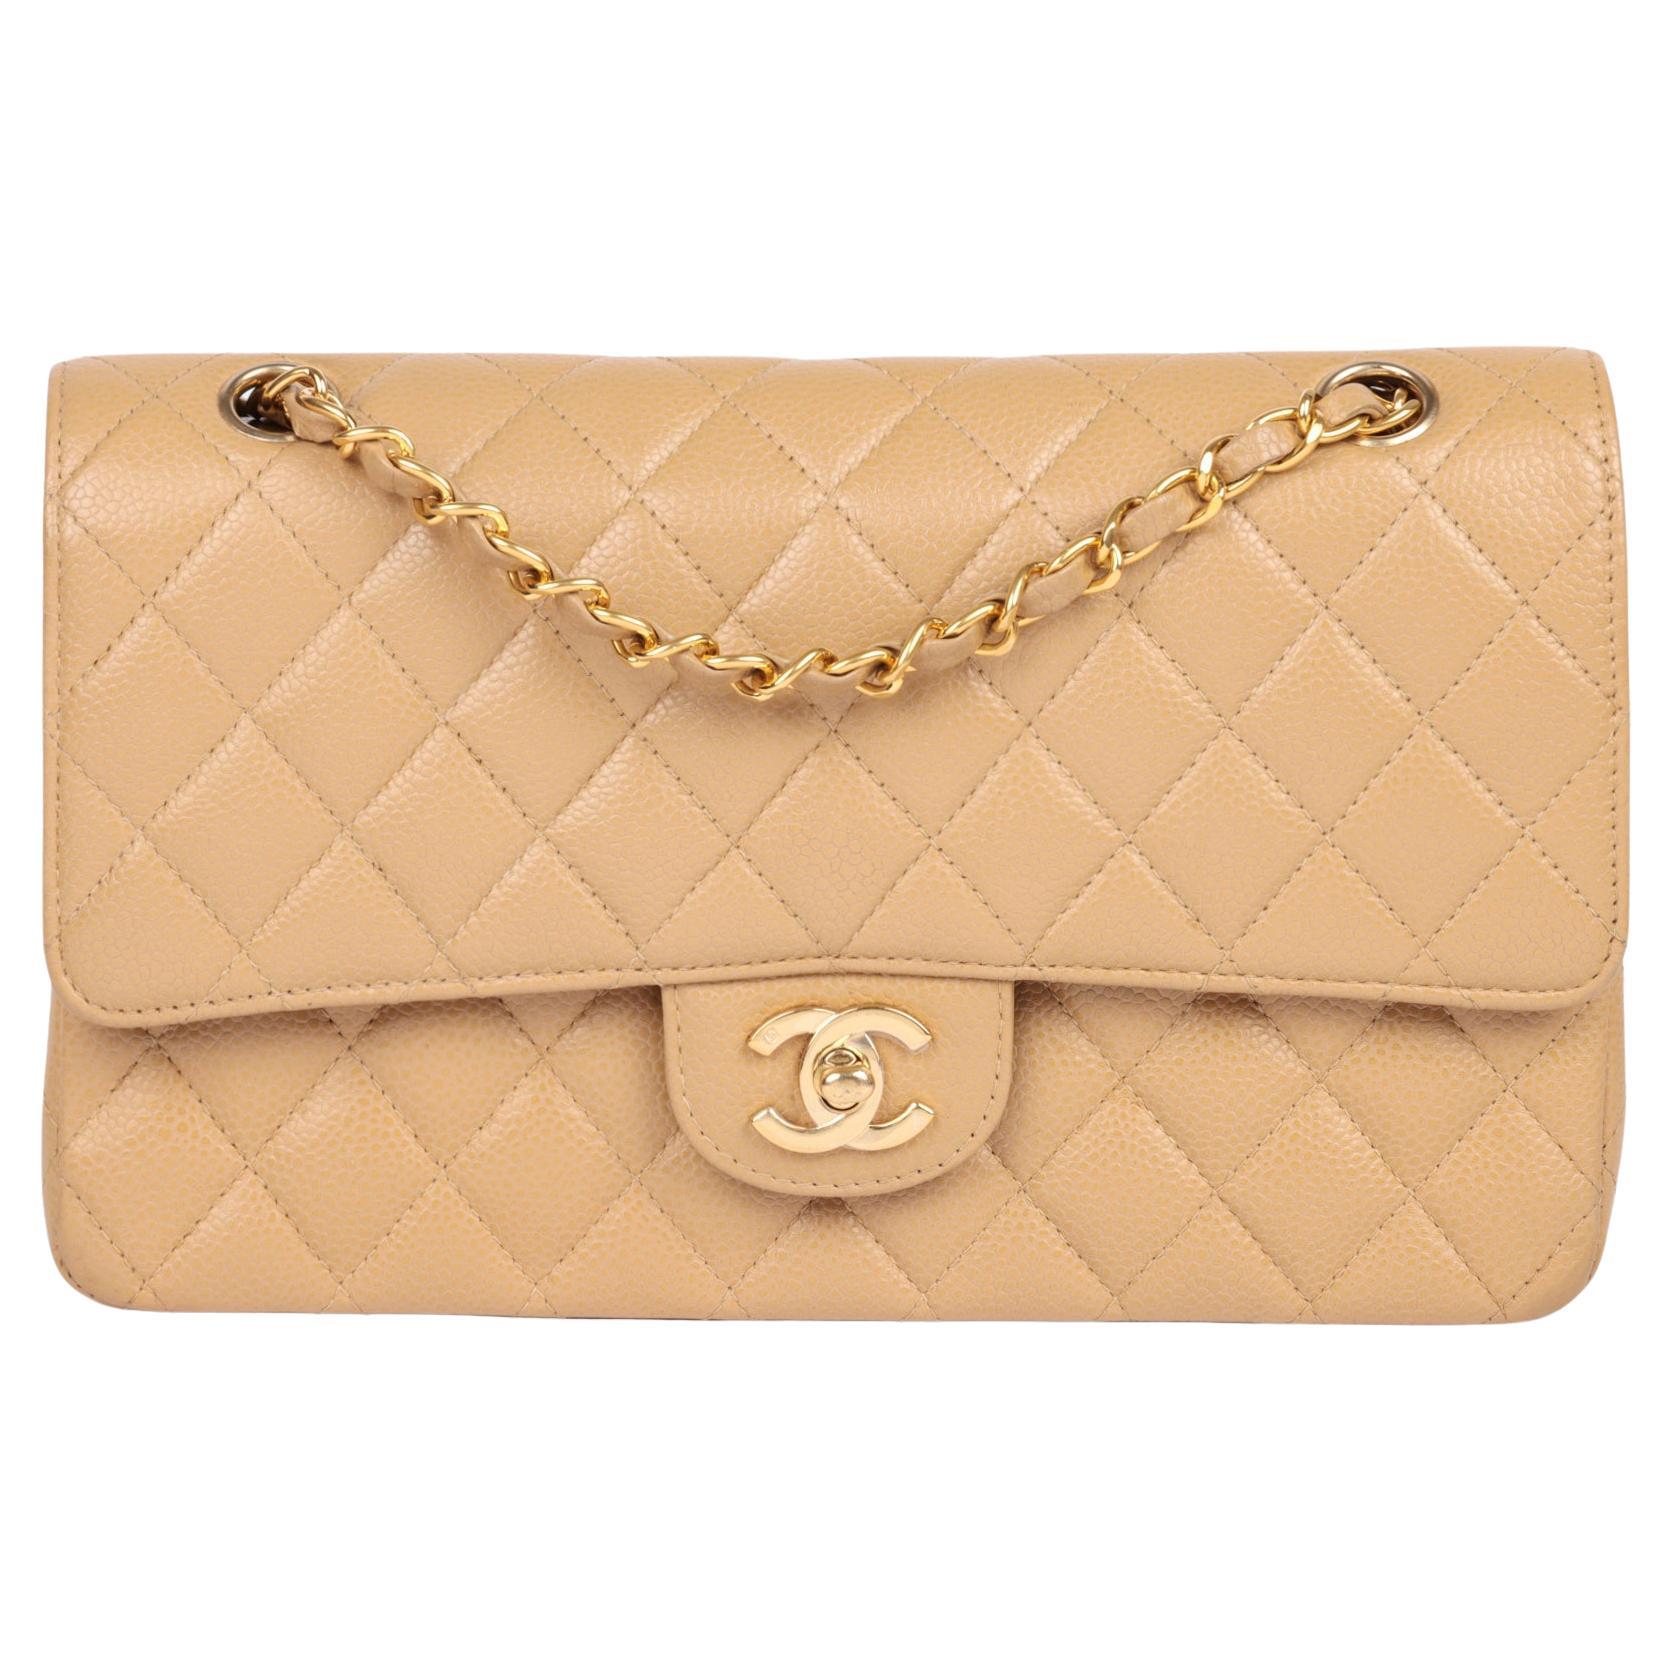 CHANEL Beige Quilted Caviar Leather Medium Classic Double Flap Bag